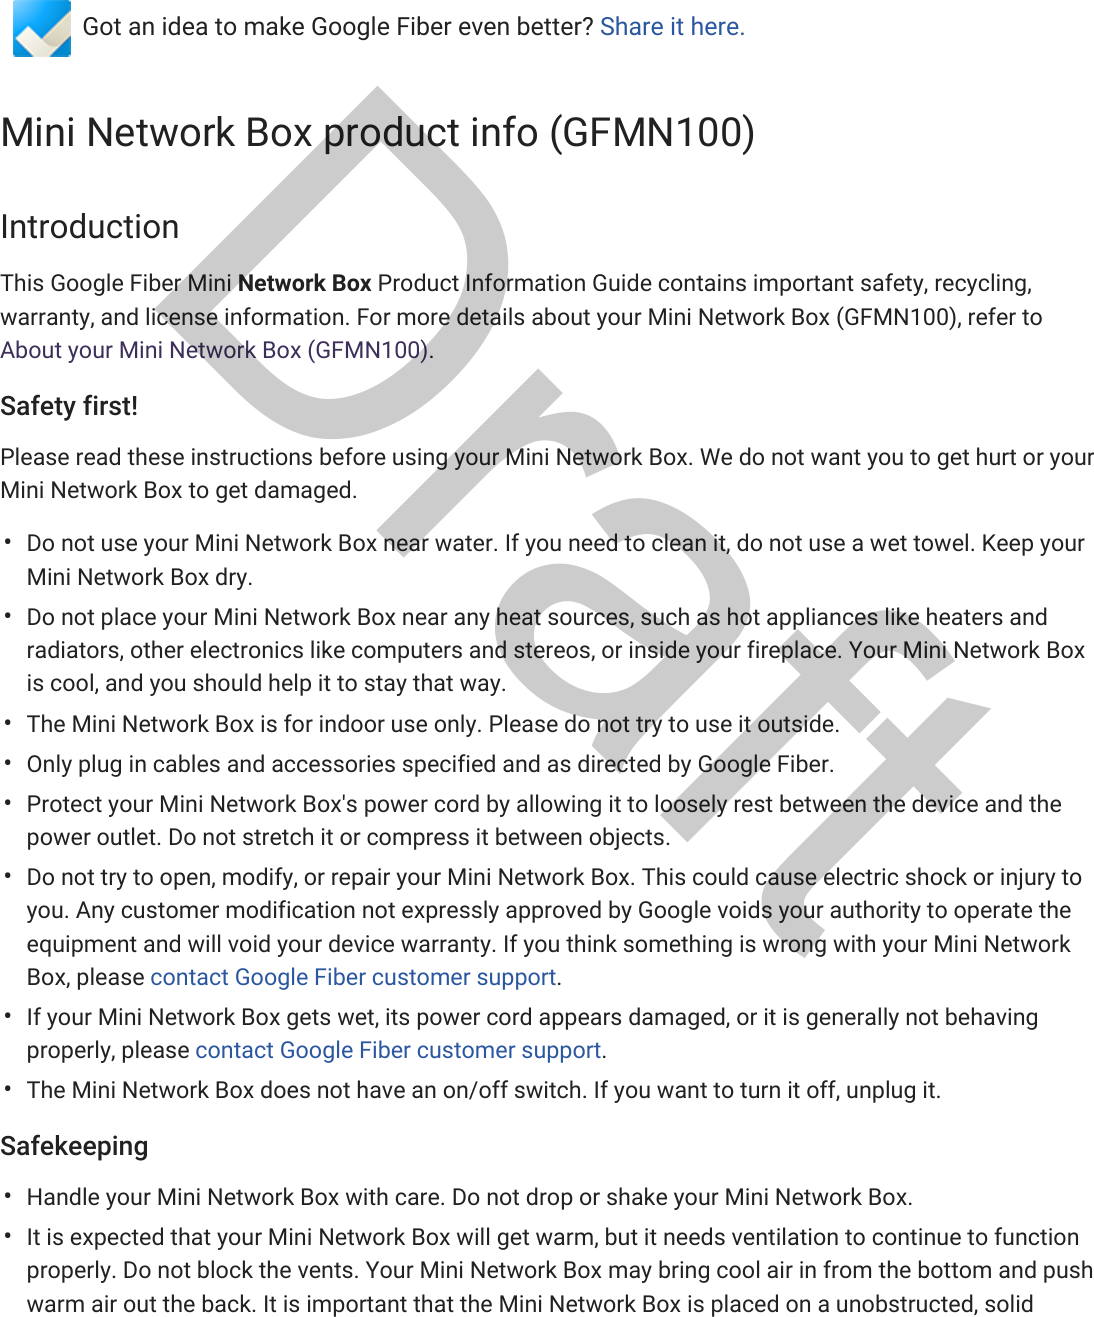 Fiber HelpFIBER  FORUM CONTACT USGot an idea to make Google Fiber even better? Share it here.Mini Network Box product info (GFMN100)IntroductionThis Google Fiber Mini Network Box Product Information Guide contains important safety, recycling,warranty, and license information. For more details about your Mini Network Box (GFMN100), refer toAbout your Mini Network Box (GFMN100).Safety first!Please read these instructions before using your Mini Network Box. We do not want you to get hurt or yourMini Network Box to get damaged.Do not use your Mini Network Box near water. If you need to clean it, do not use a wet towel. Keep yourMini Network Box dry.Do not place your Mini Network Box near any heat sources, such as hot appliances like heaters andradiators, other electronics like computers and stereos, or inside your fireplace. Your Mini Network Boxis cool, and you should help it to stay that way.The Mini Network Box is for indoor use only. Please do not try to use it outside.Only plug in cables and accessories specified and as directed by Google Fiber.Protect your Mini Network Box&apos;s power cord by allowing it to loosely rest between the device and thepower outlet. Do not stretch it or compress it between objects.Do not try to open, modify, or repair your Mini Network Box. This could cause electric shock or injury toyou. Any customer modification not expressly approved by Google voids your authority to operate theequipment and will void your device warranty. If you think something is wrong with your Mini NetworkBox, please contact Google Fiber customer support.If your Mini Network Box gets wet, its power cord appears damaged, or it is generally not behavingproperly, please contact Google Fiber customer support.The Mini Network Box does not have an on/off switch. If you want to turn it off, unplug it.SafekeepingHandle your Mini Network Box with care. Do not drop or shake your Mini Network Box.It is expected that your Mini Network Box will get warm, but it needs ventilation to continue to functionproperly. Do not block the vents. Your Mini Network Box may bring cool air in from the bottom and pushwarm air out the back. It is important that the Mini Network Box is placed on a unobstructed, solid••••••••••Draft